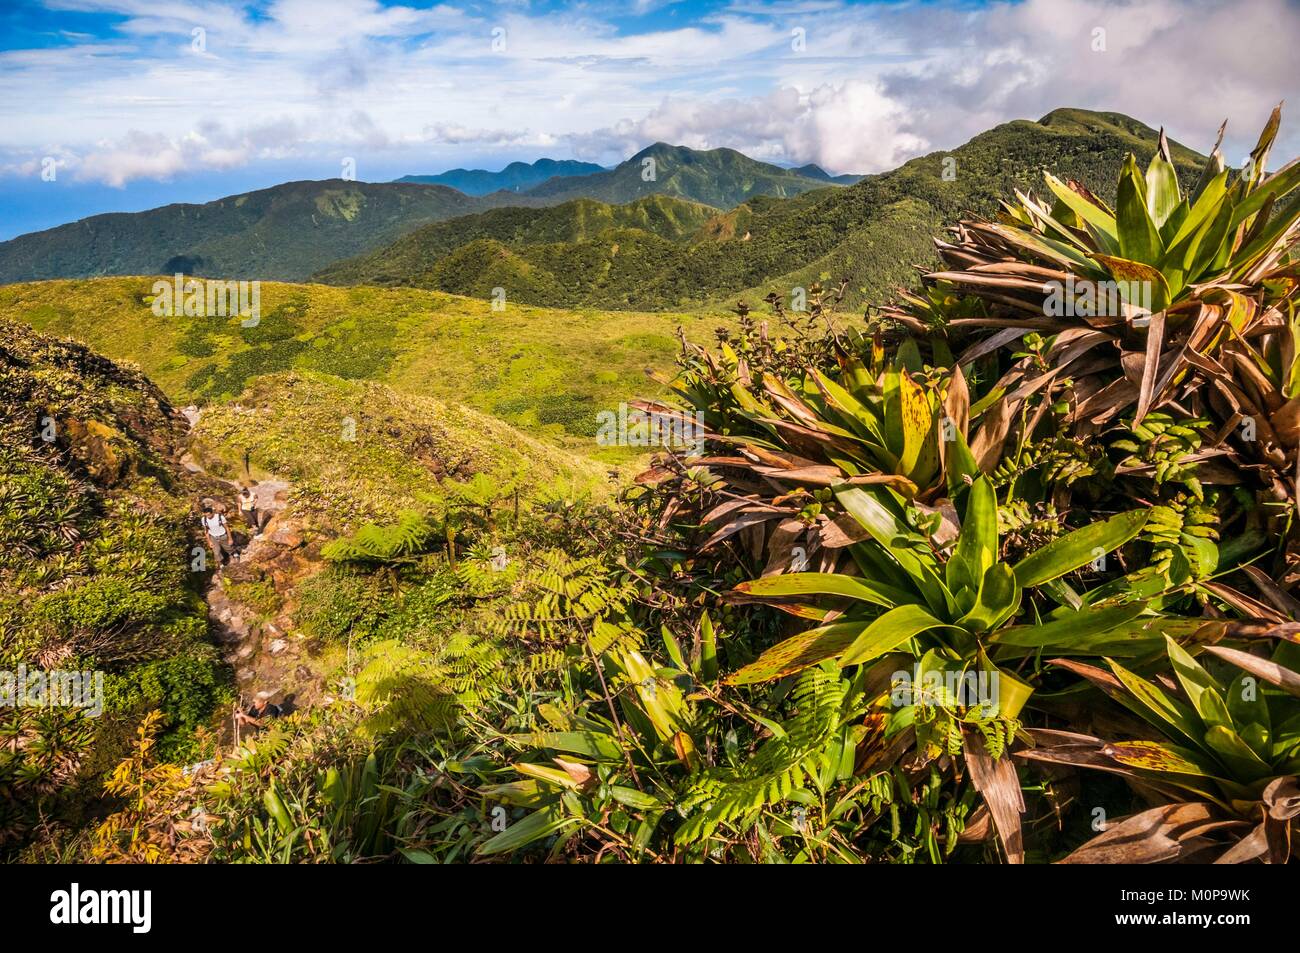 France,the Caribbean,Lesser Antilles,Guadeloupe,Basse-Terre and Saint-Claude,the vegetation on the flanks of the Soufrière volcano is remarkable for its biodiversity,it ranges on three levels: dense rainforest up to 1,100 meters,dense wet scrubs between 1,100 and 1,400 meters,consisting of shrubs not exceeding two meters in height (among others,Schefflera attenuata,Clusia mangle,Miconia coriacea),the summit prairies from which bromeliaceae emerge: Guzmania plumieri ubiquitous,and above all Pitcairnia bifrons,pioneer species present up to the edges of eruptive mouths Stock Photo